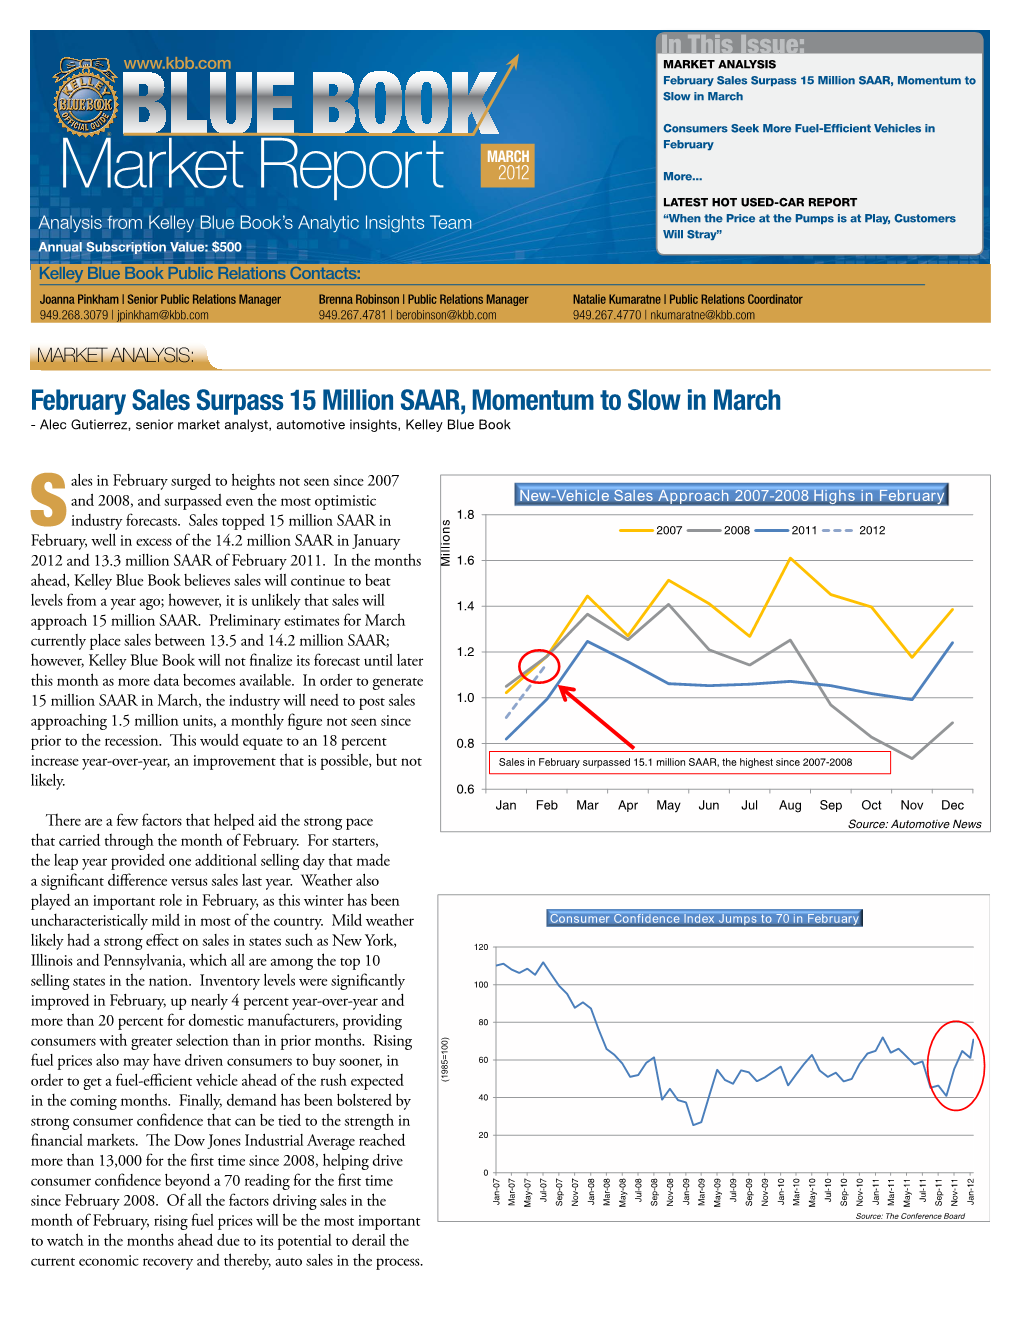 BLUE BOOK Market Report MARCH 2012 MARKET ANALYSIS: Continued Chrysler, Mazda, Volkswagen and Hyundai Lead Sales Gains; Continue to Fight for Share